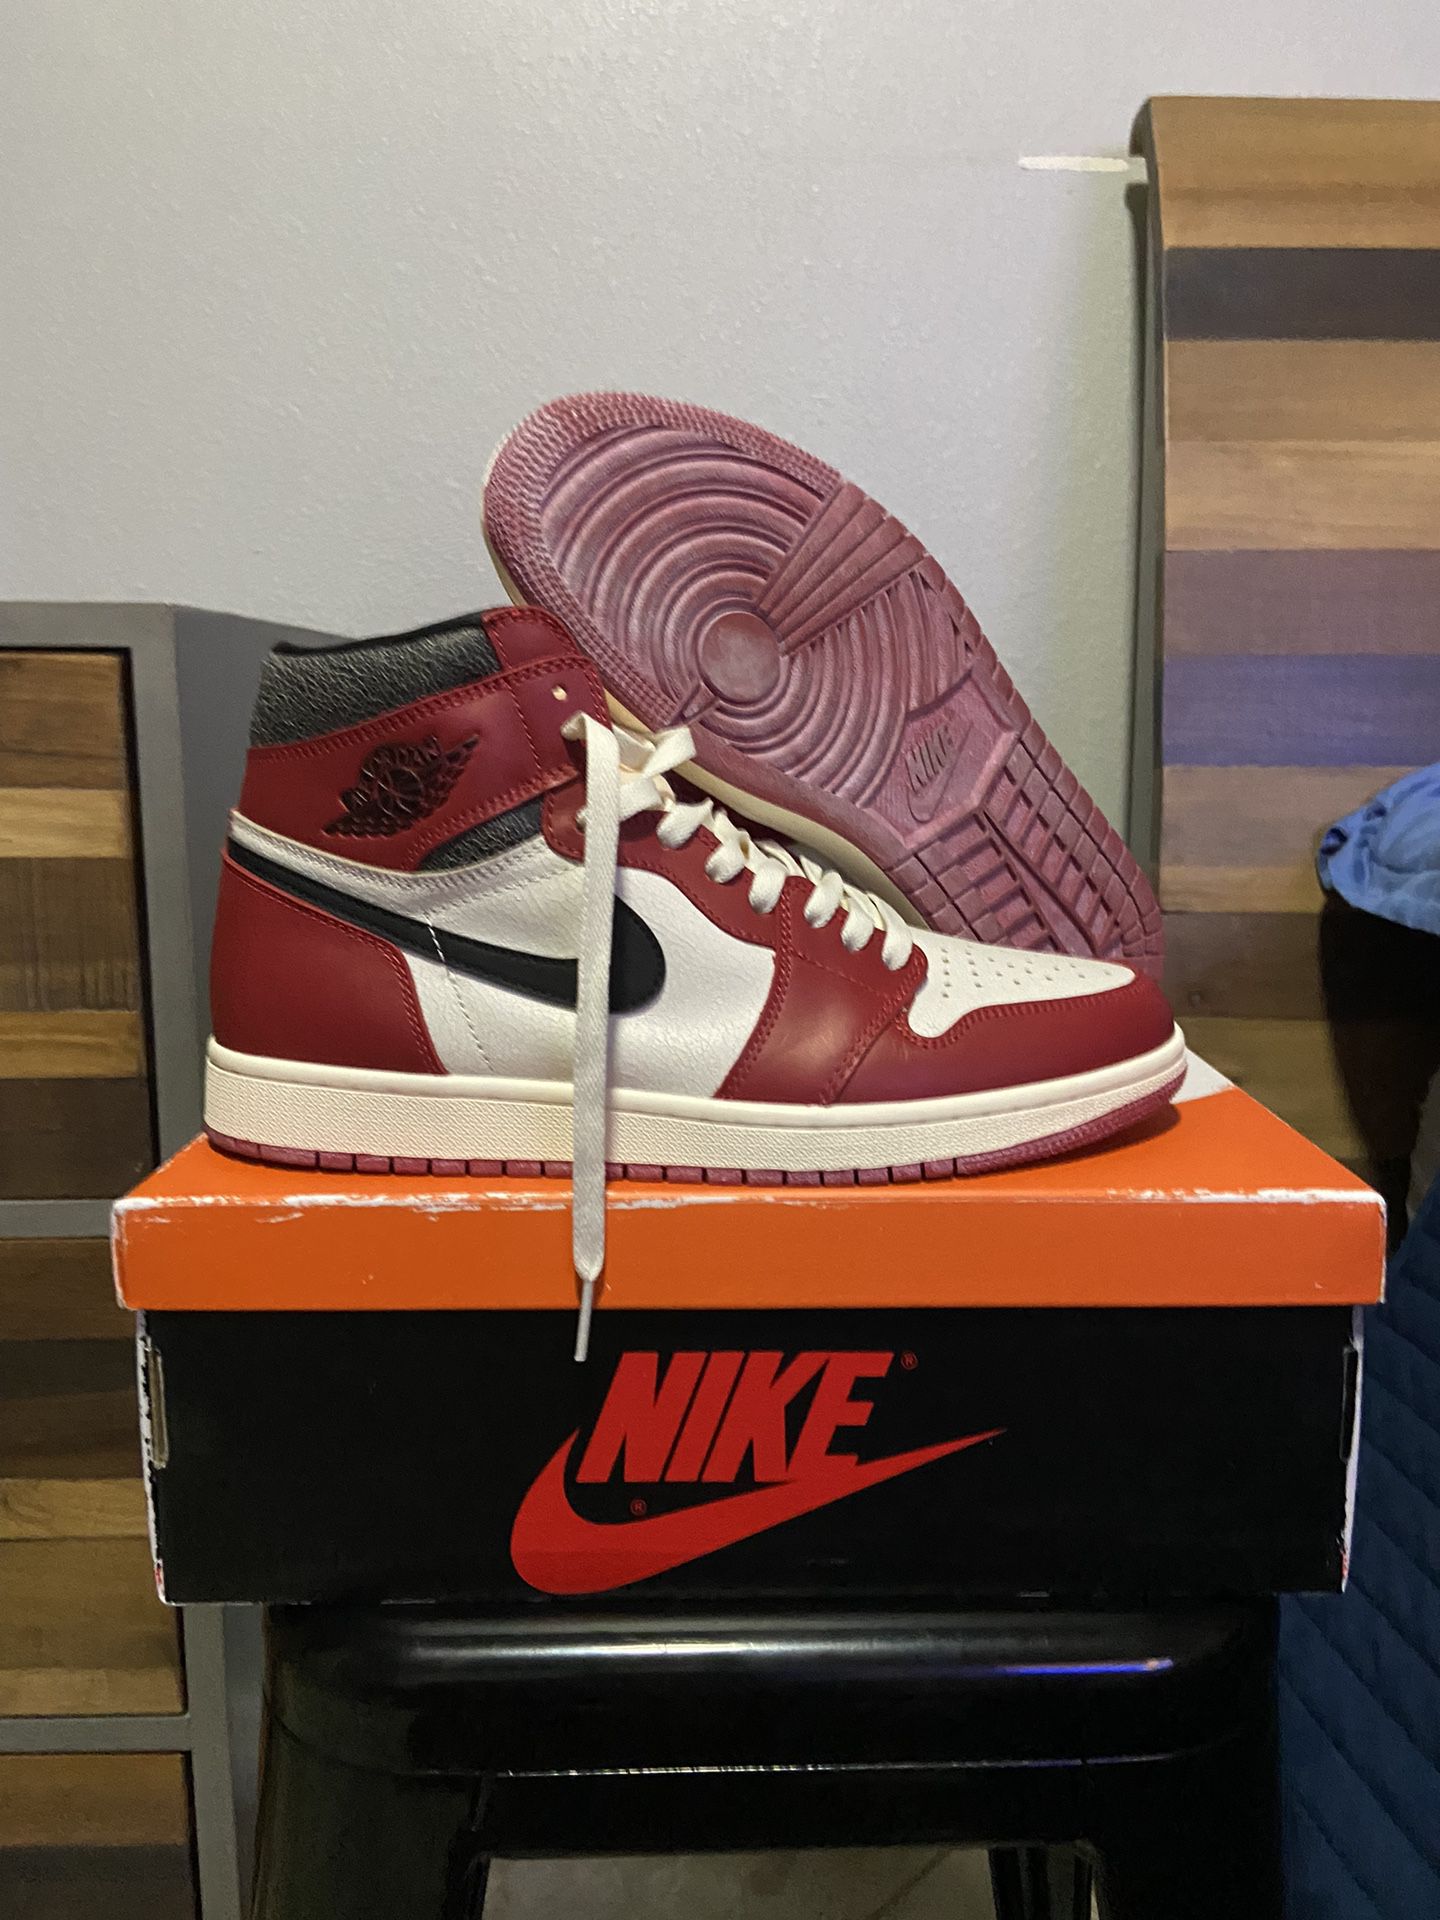 Jordan 1 Lost and Founds